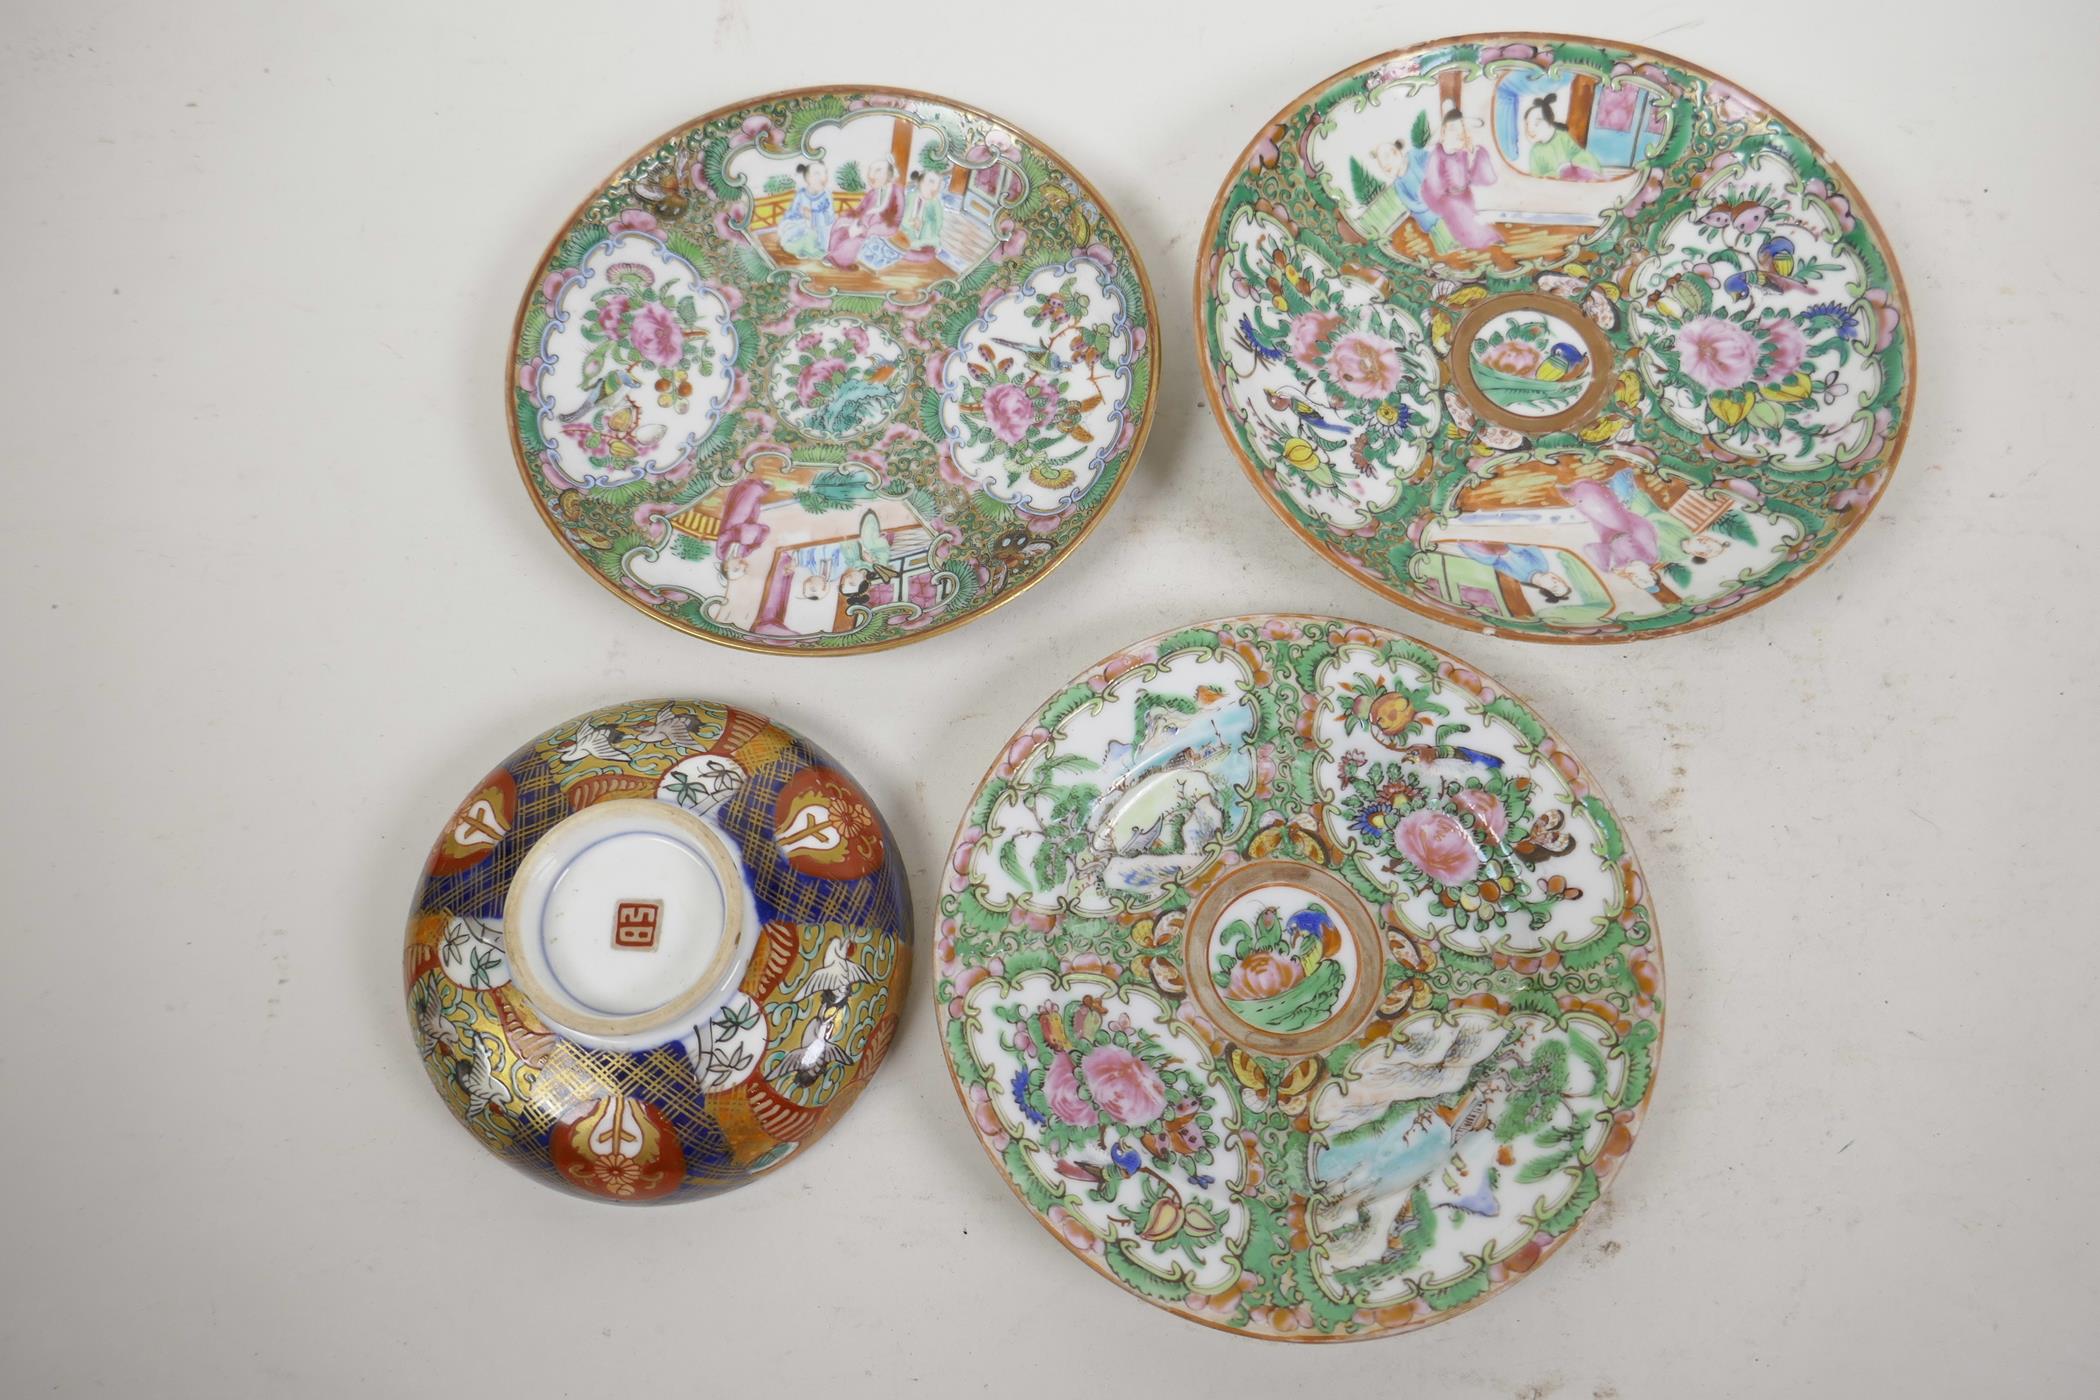 Three Canton famille rose saucer dishes painted with panels of figures and flowers, largest 6½" - Image 2 of 2